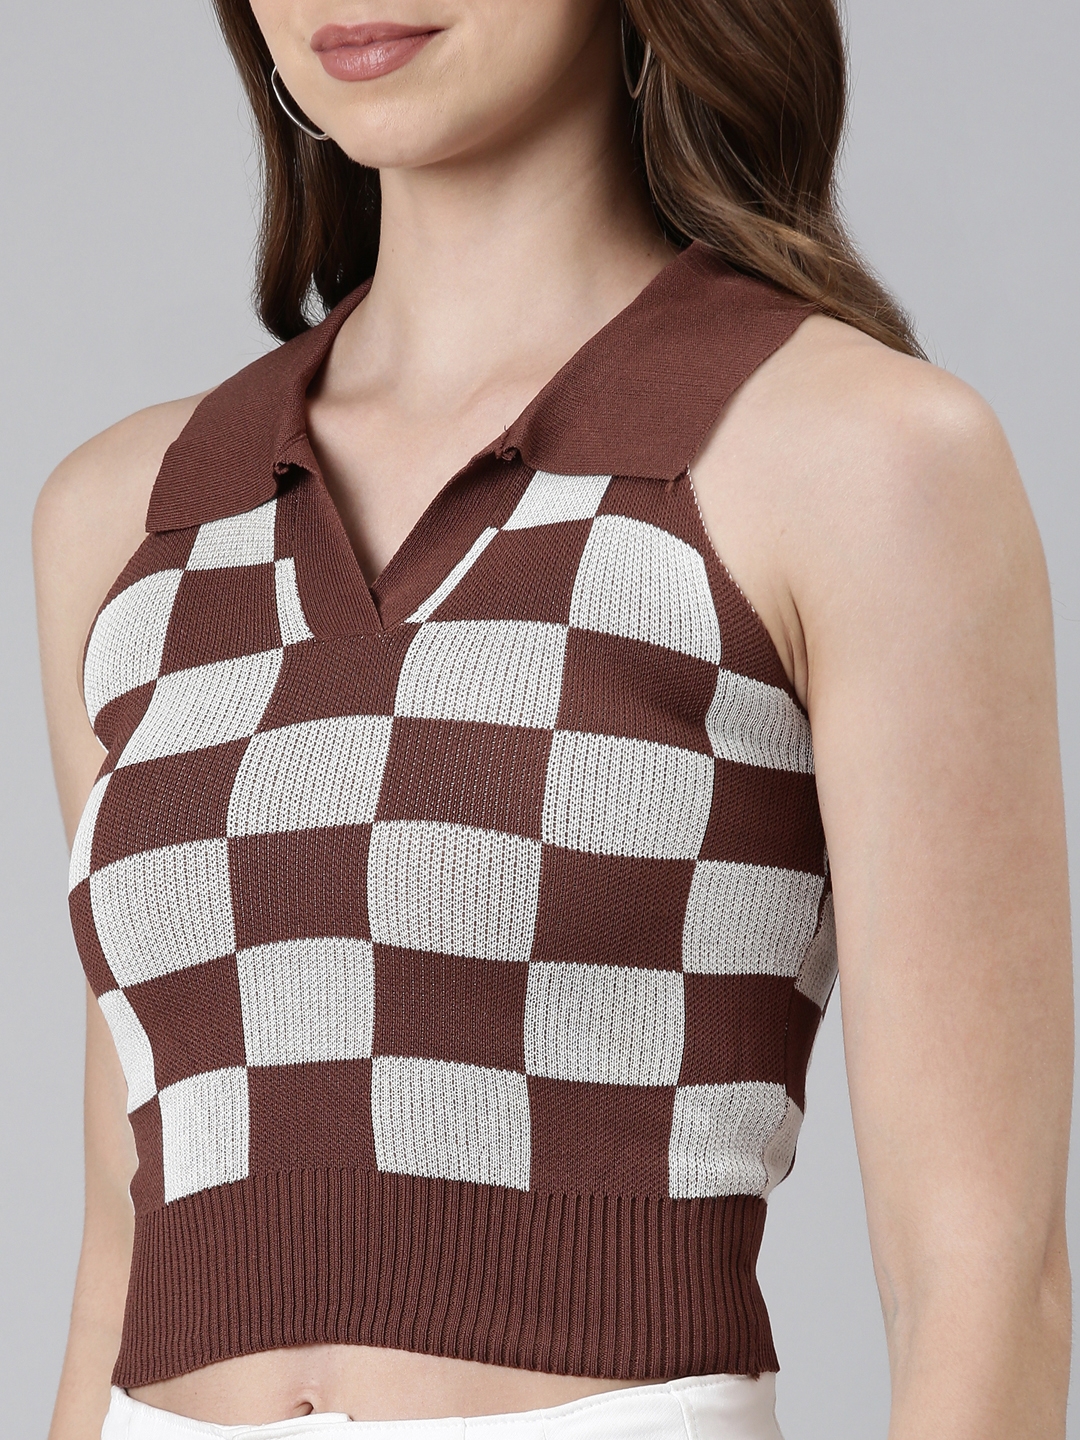 Showoff | SHOWOFF Women's Above the Keyboard Collar Checked Coffee Brown Cinched Waist Crop Top 7